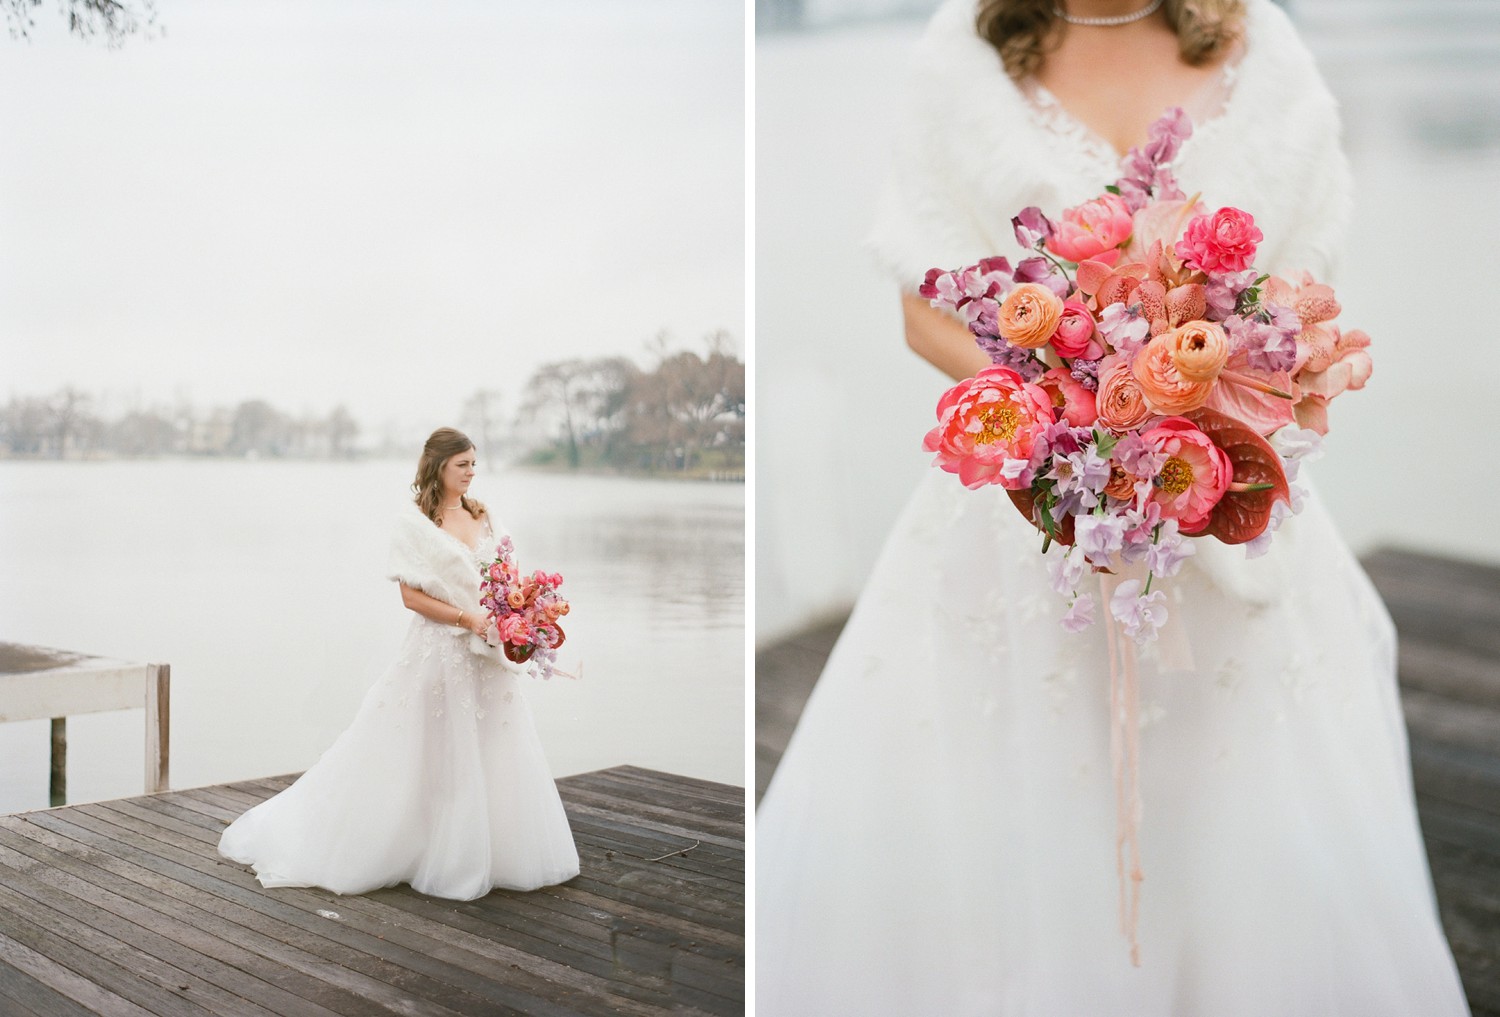 Texas Winter Bride with Pink Bouquet